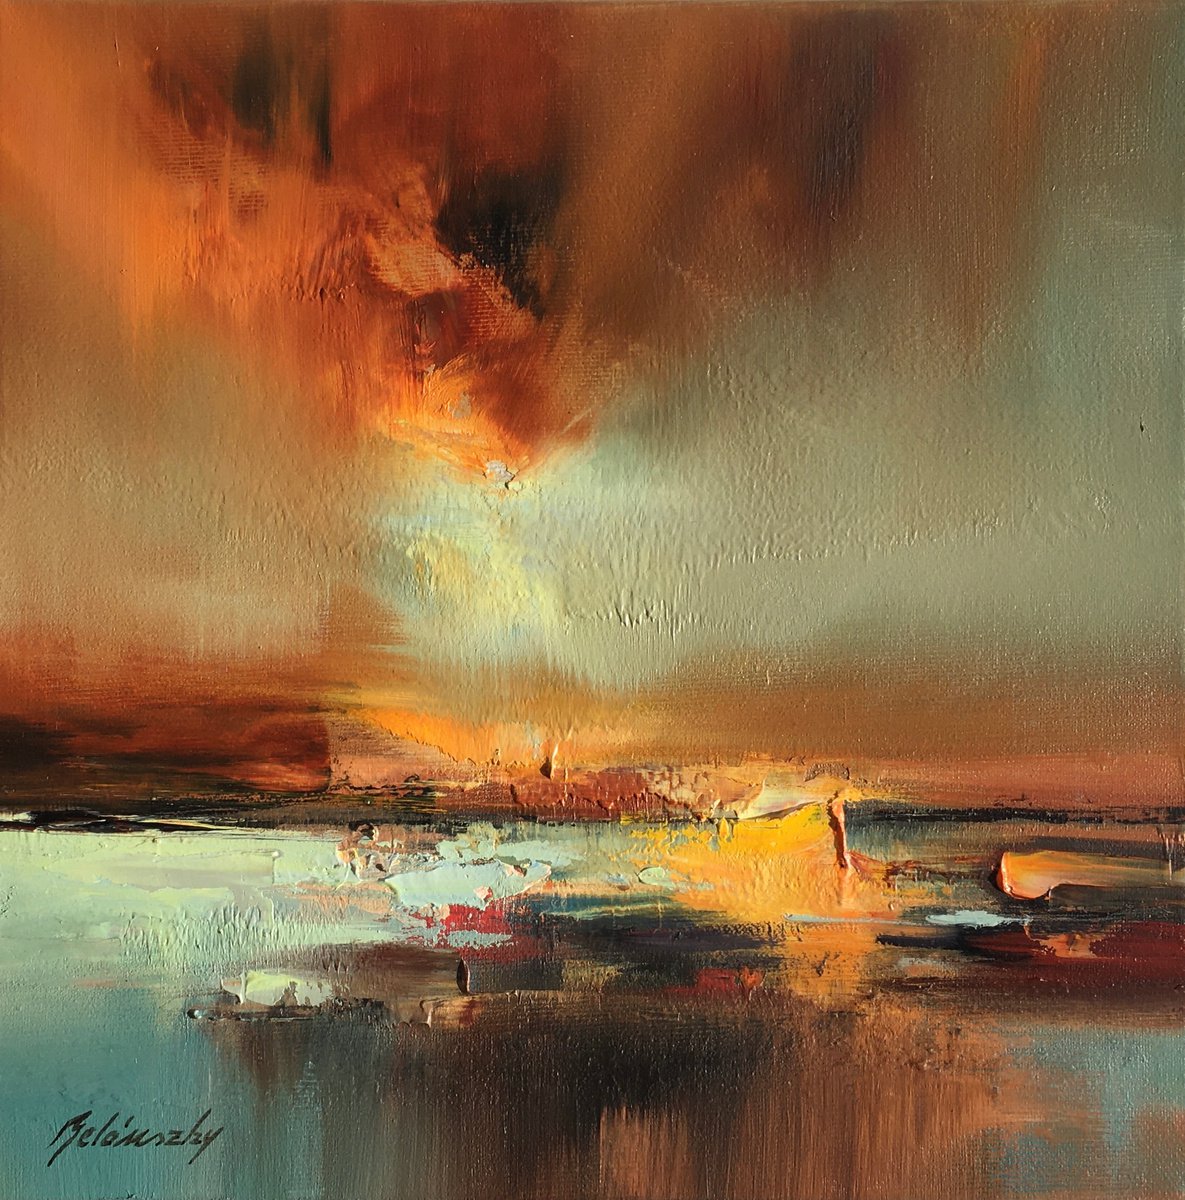 Warm me up - 30 x 30 cm, abstract landscape painting in red and blue